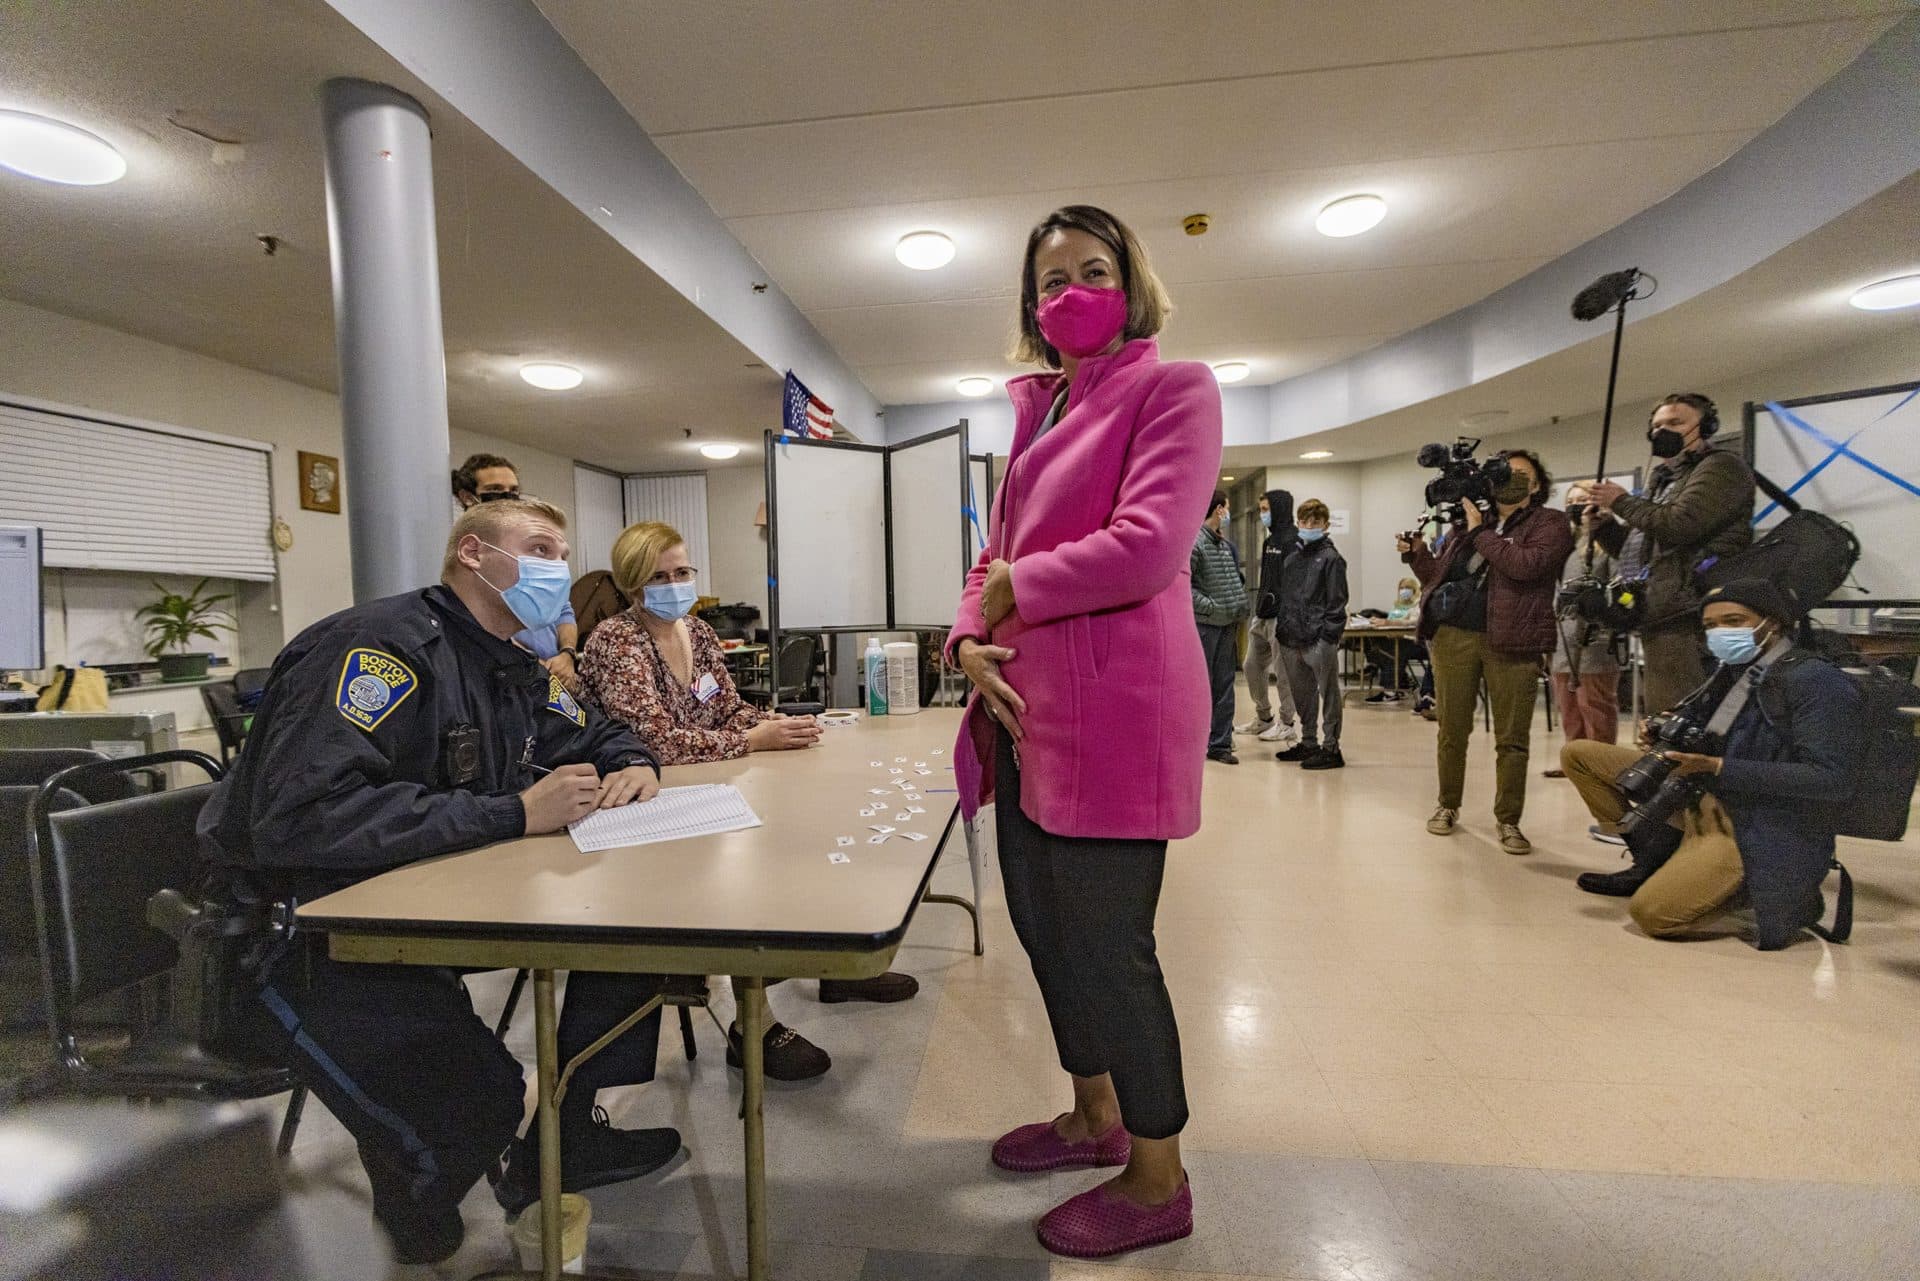 Candidate for mayor of Boston Annissa Essaibi George playfully looks at the press and hides her ballot underneath her coat to keep prying eyes from seeing it before approaching the ballot box at the Bellflower Apartments in Dorchester. (Jesse Costa/WBUR)